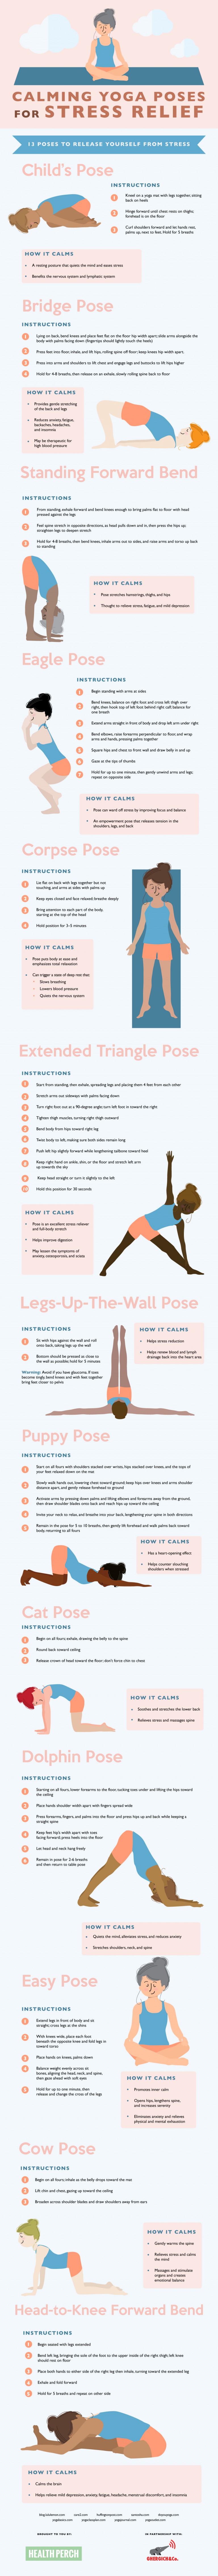 13 Yoga Poses For Inner Peace During Stressful Times Infographic